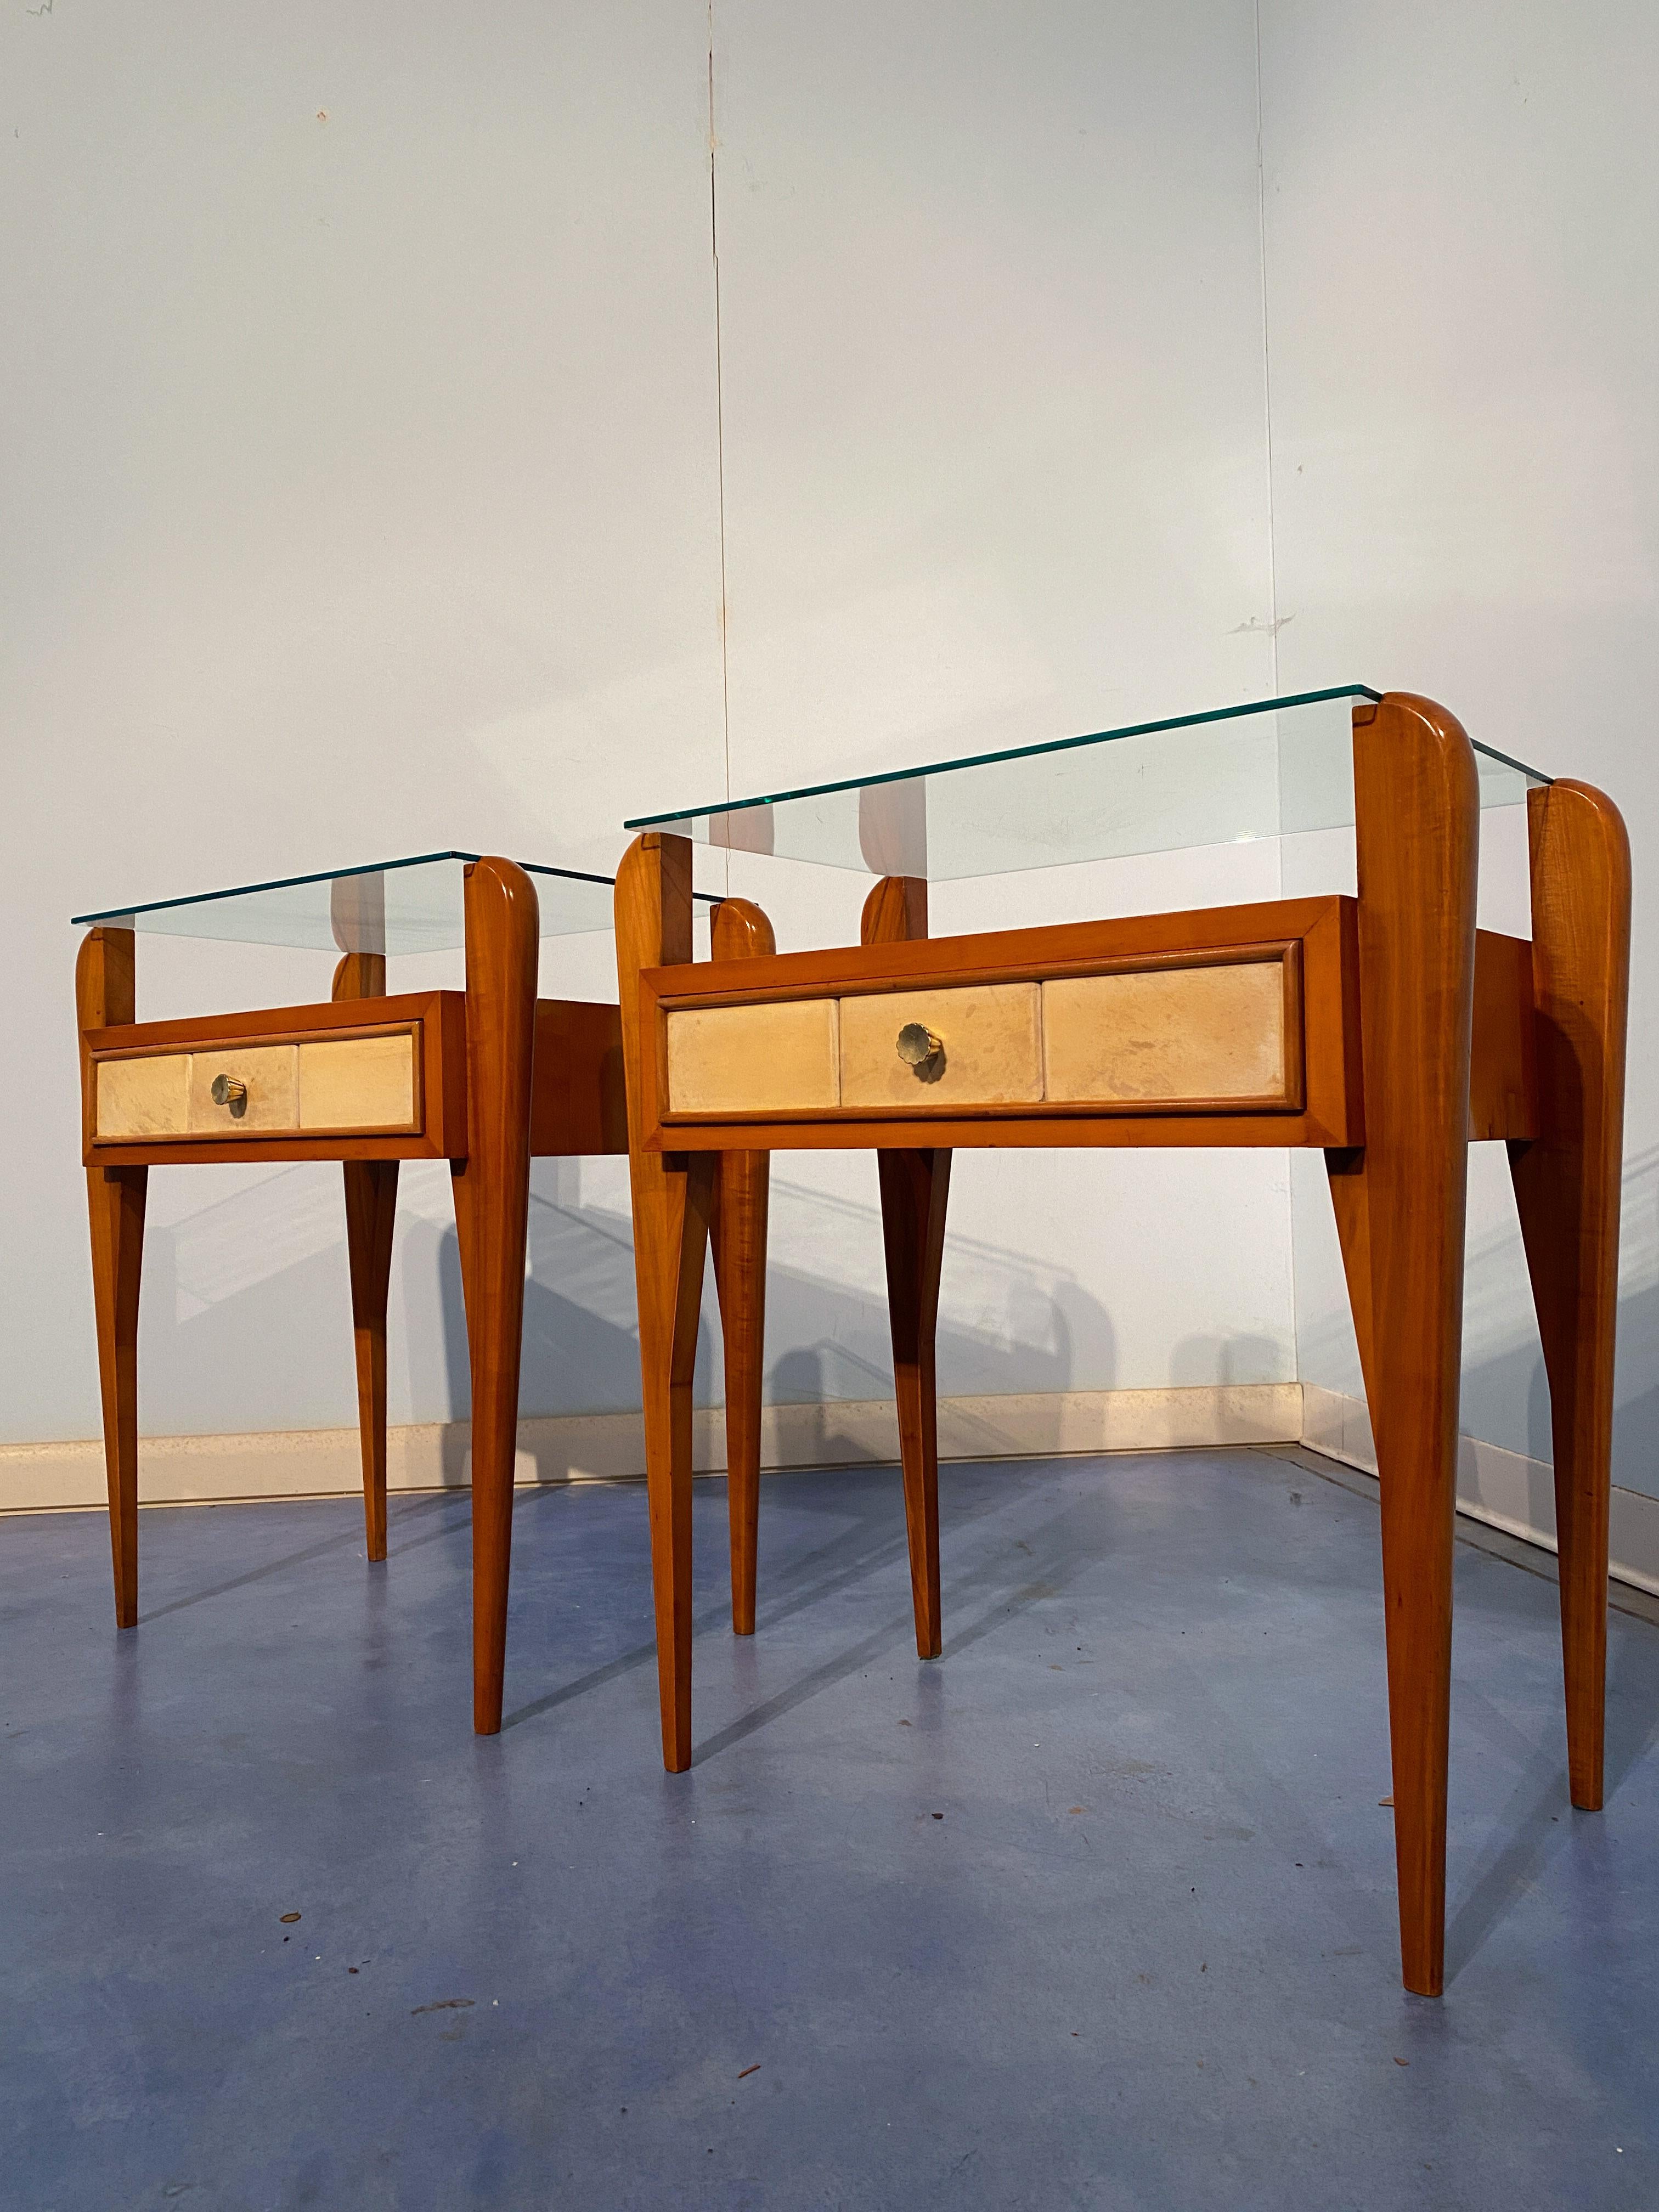 Italian Mid-Century Parchment Bedside or Nightstands by Osvaldo Borsani, 1950 In Good Condition For Sale In Traversetolo, IT